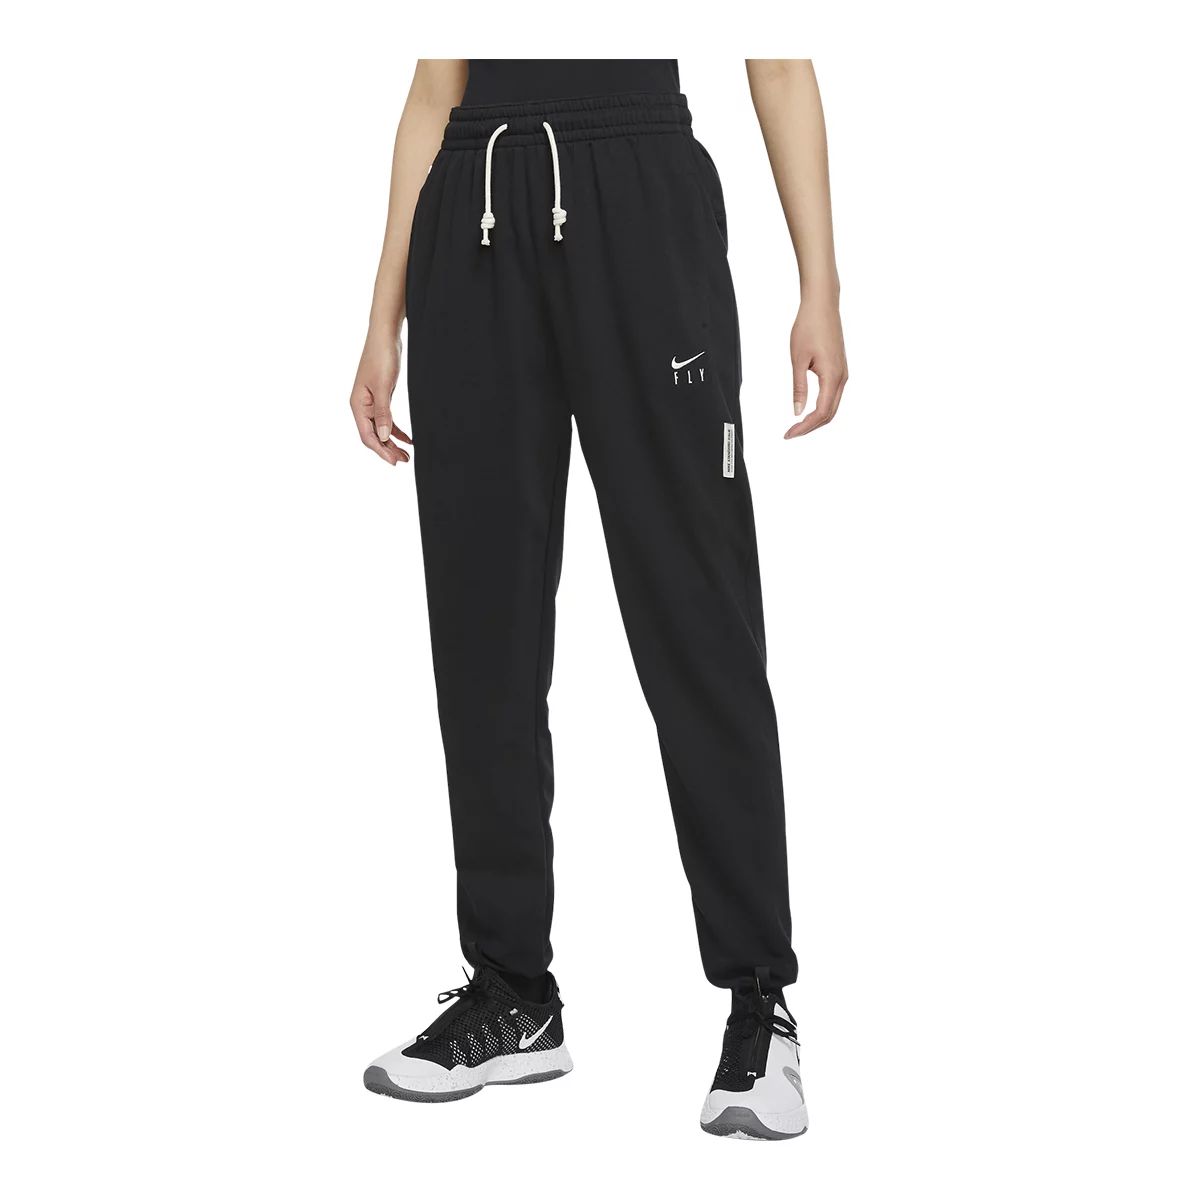 Women's - Loose Fit Pants in Black for Training